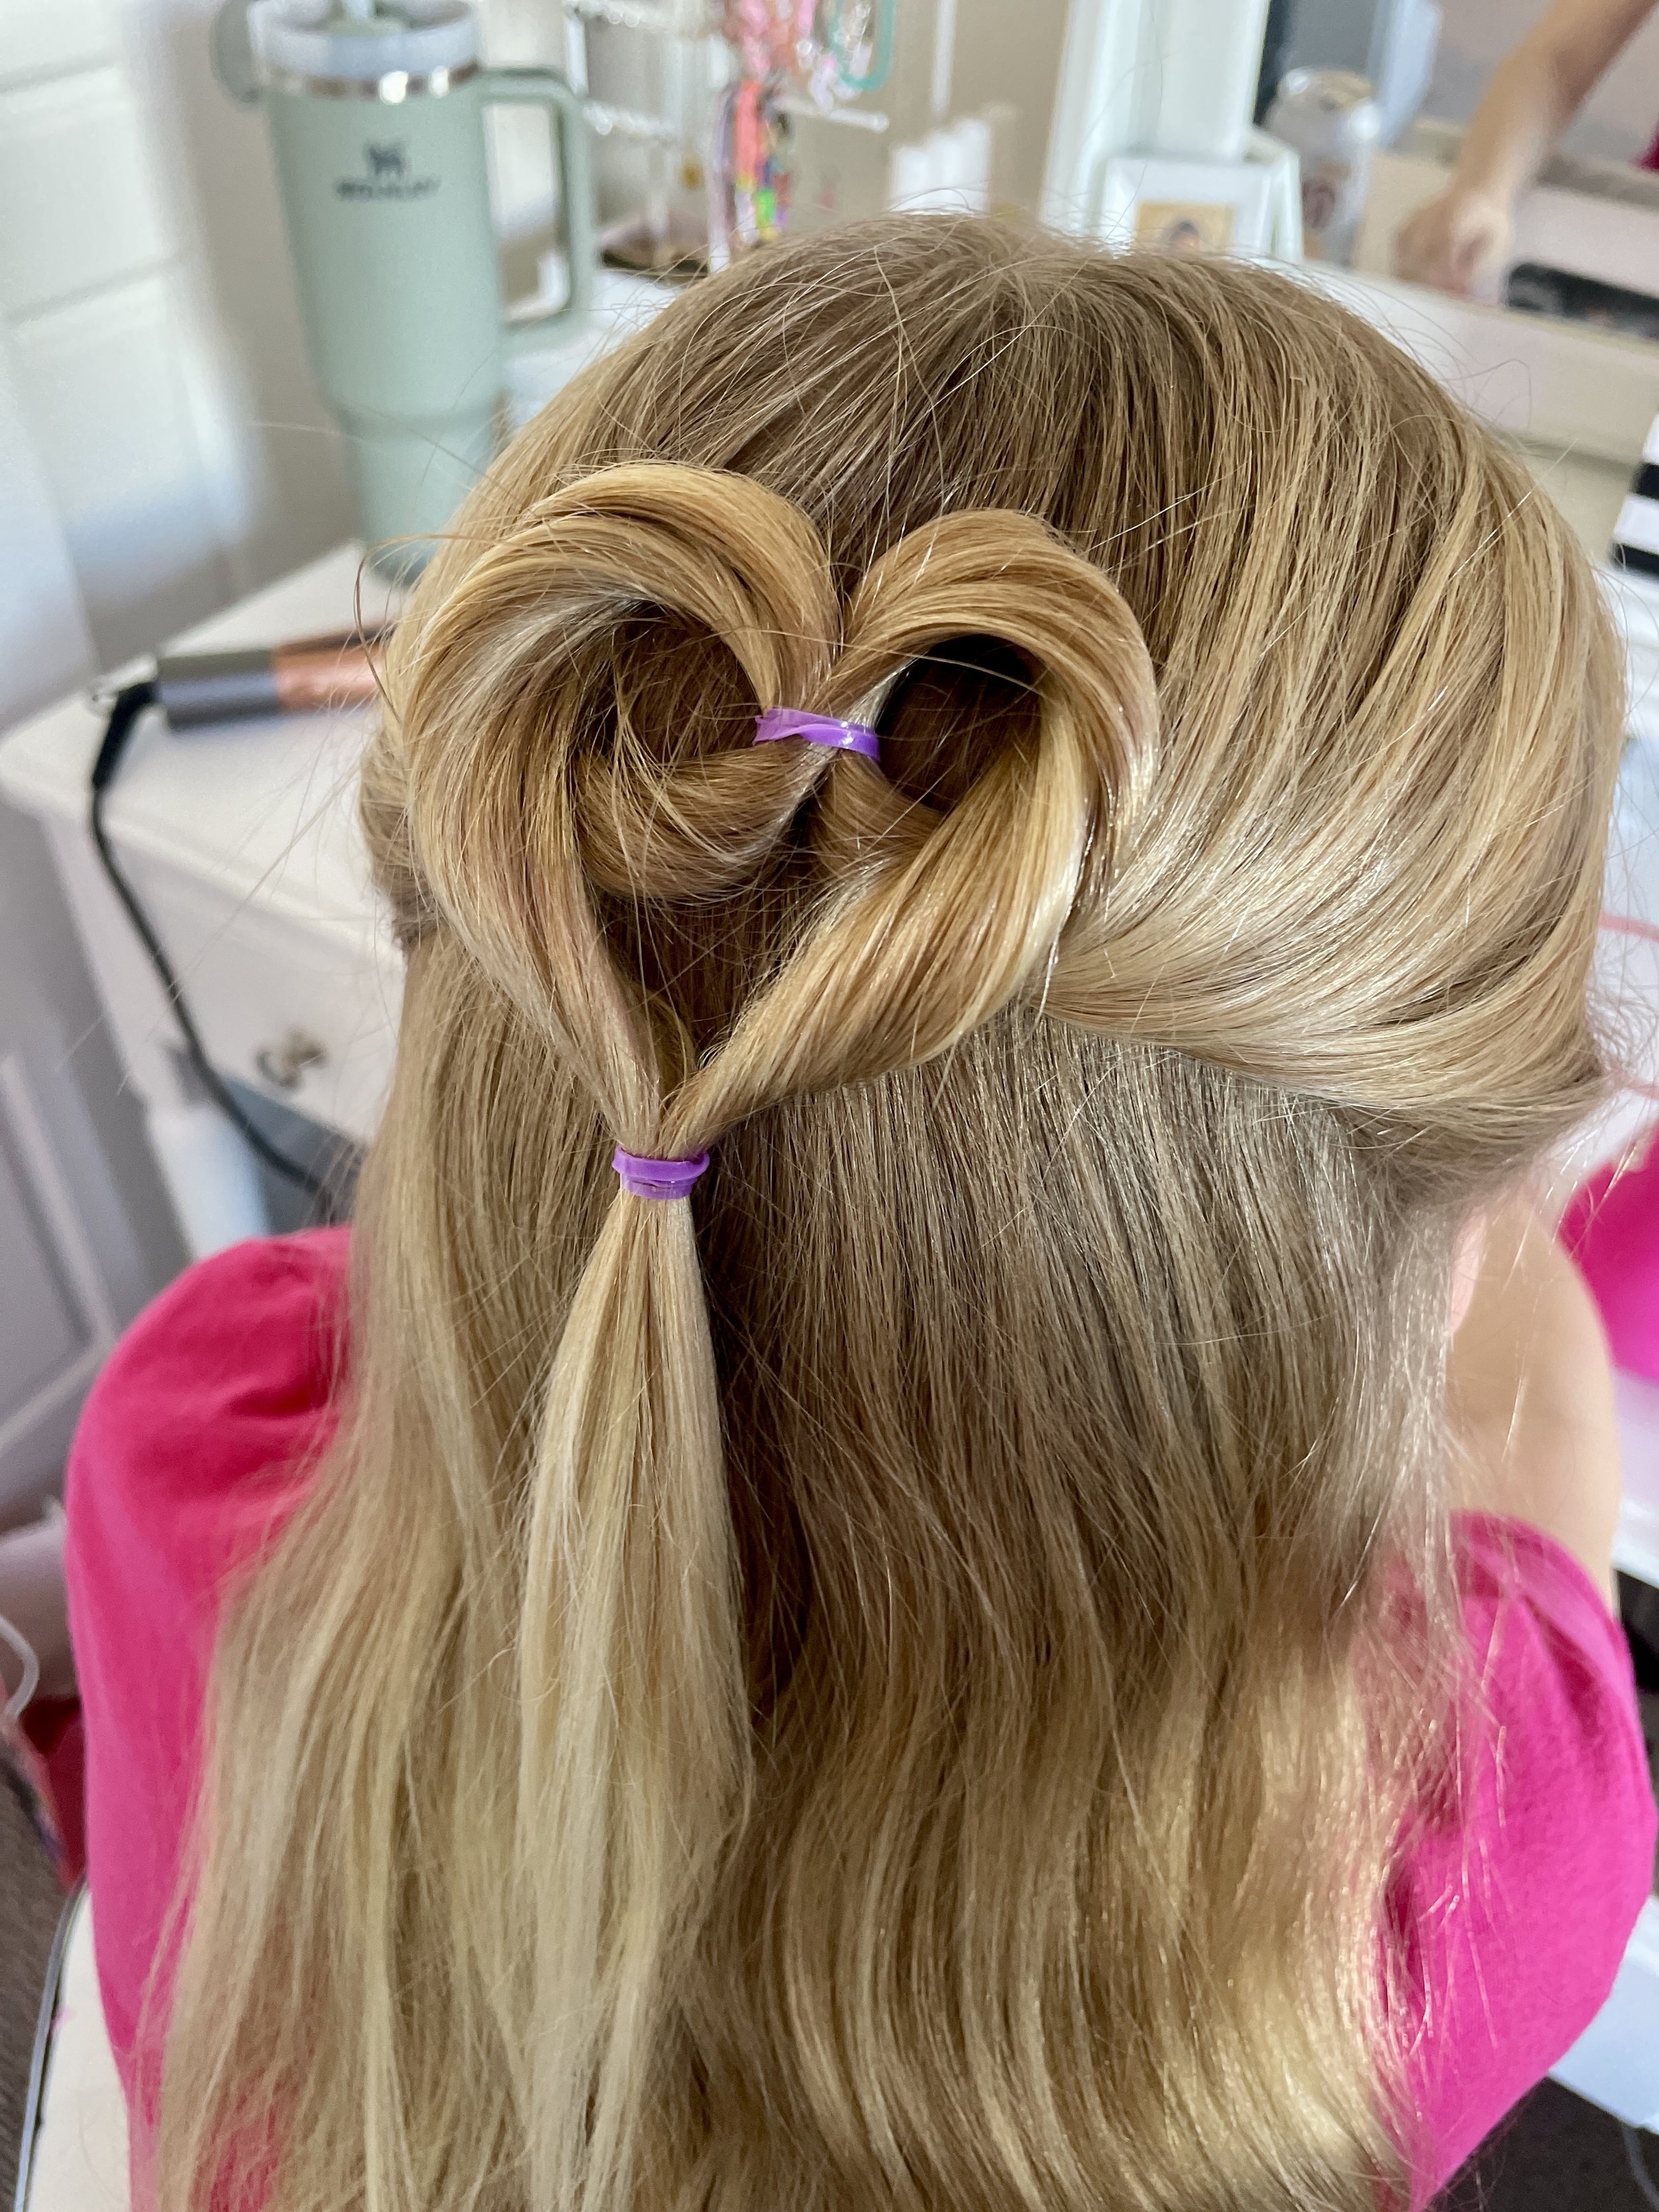 Easy little girl Hairstyle | Valentines Day + Heart Part Hair - YouTube